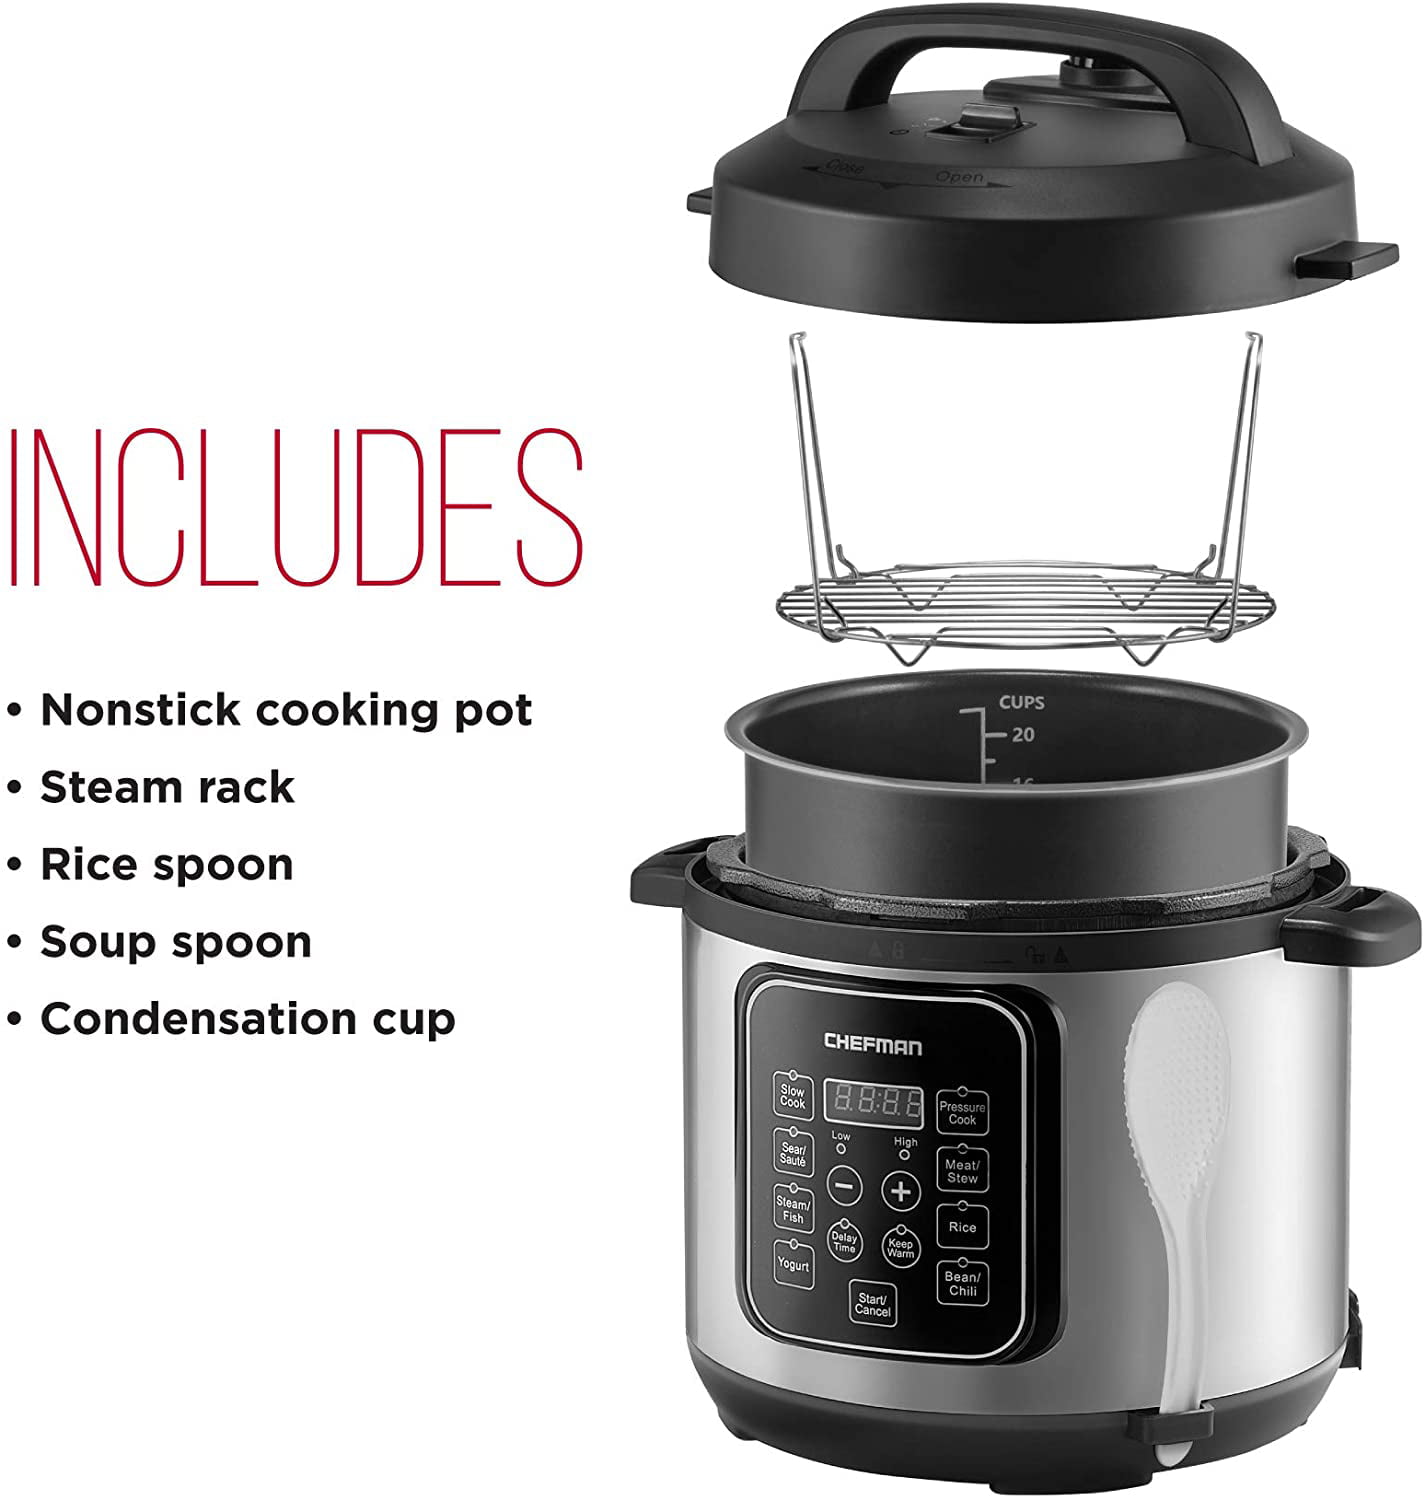 Rozmoz 12-in-1 Electric Pressure Cooker Stainless Steel Pot, Slow Cooker,  Steamer, Saute, Yogurt Maker, Warmer, Rice Cooker with Deluxe Accessory  kits, 6 Quart RP20 